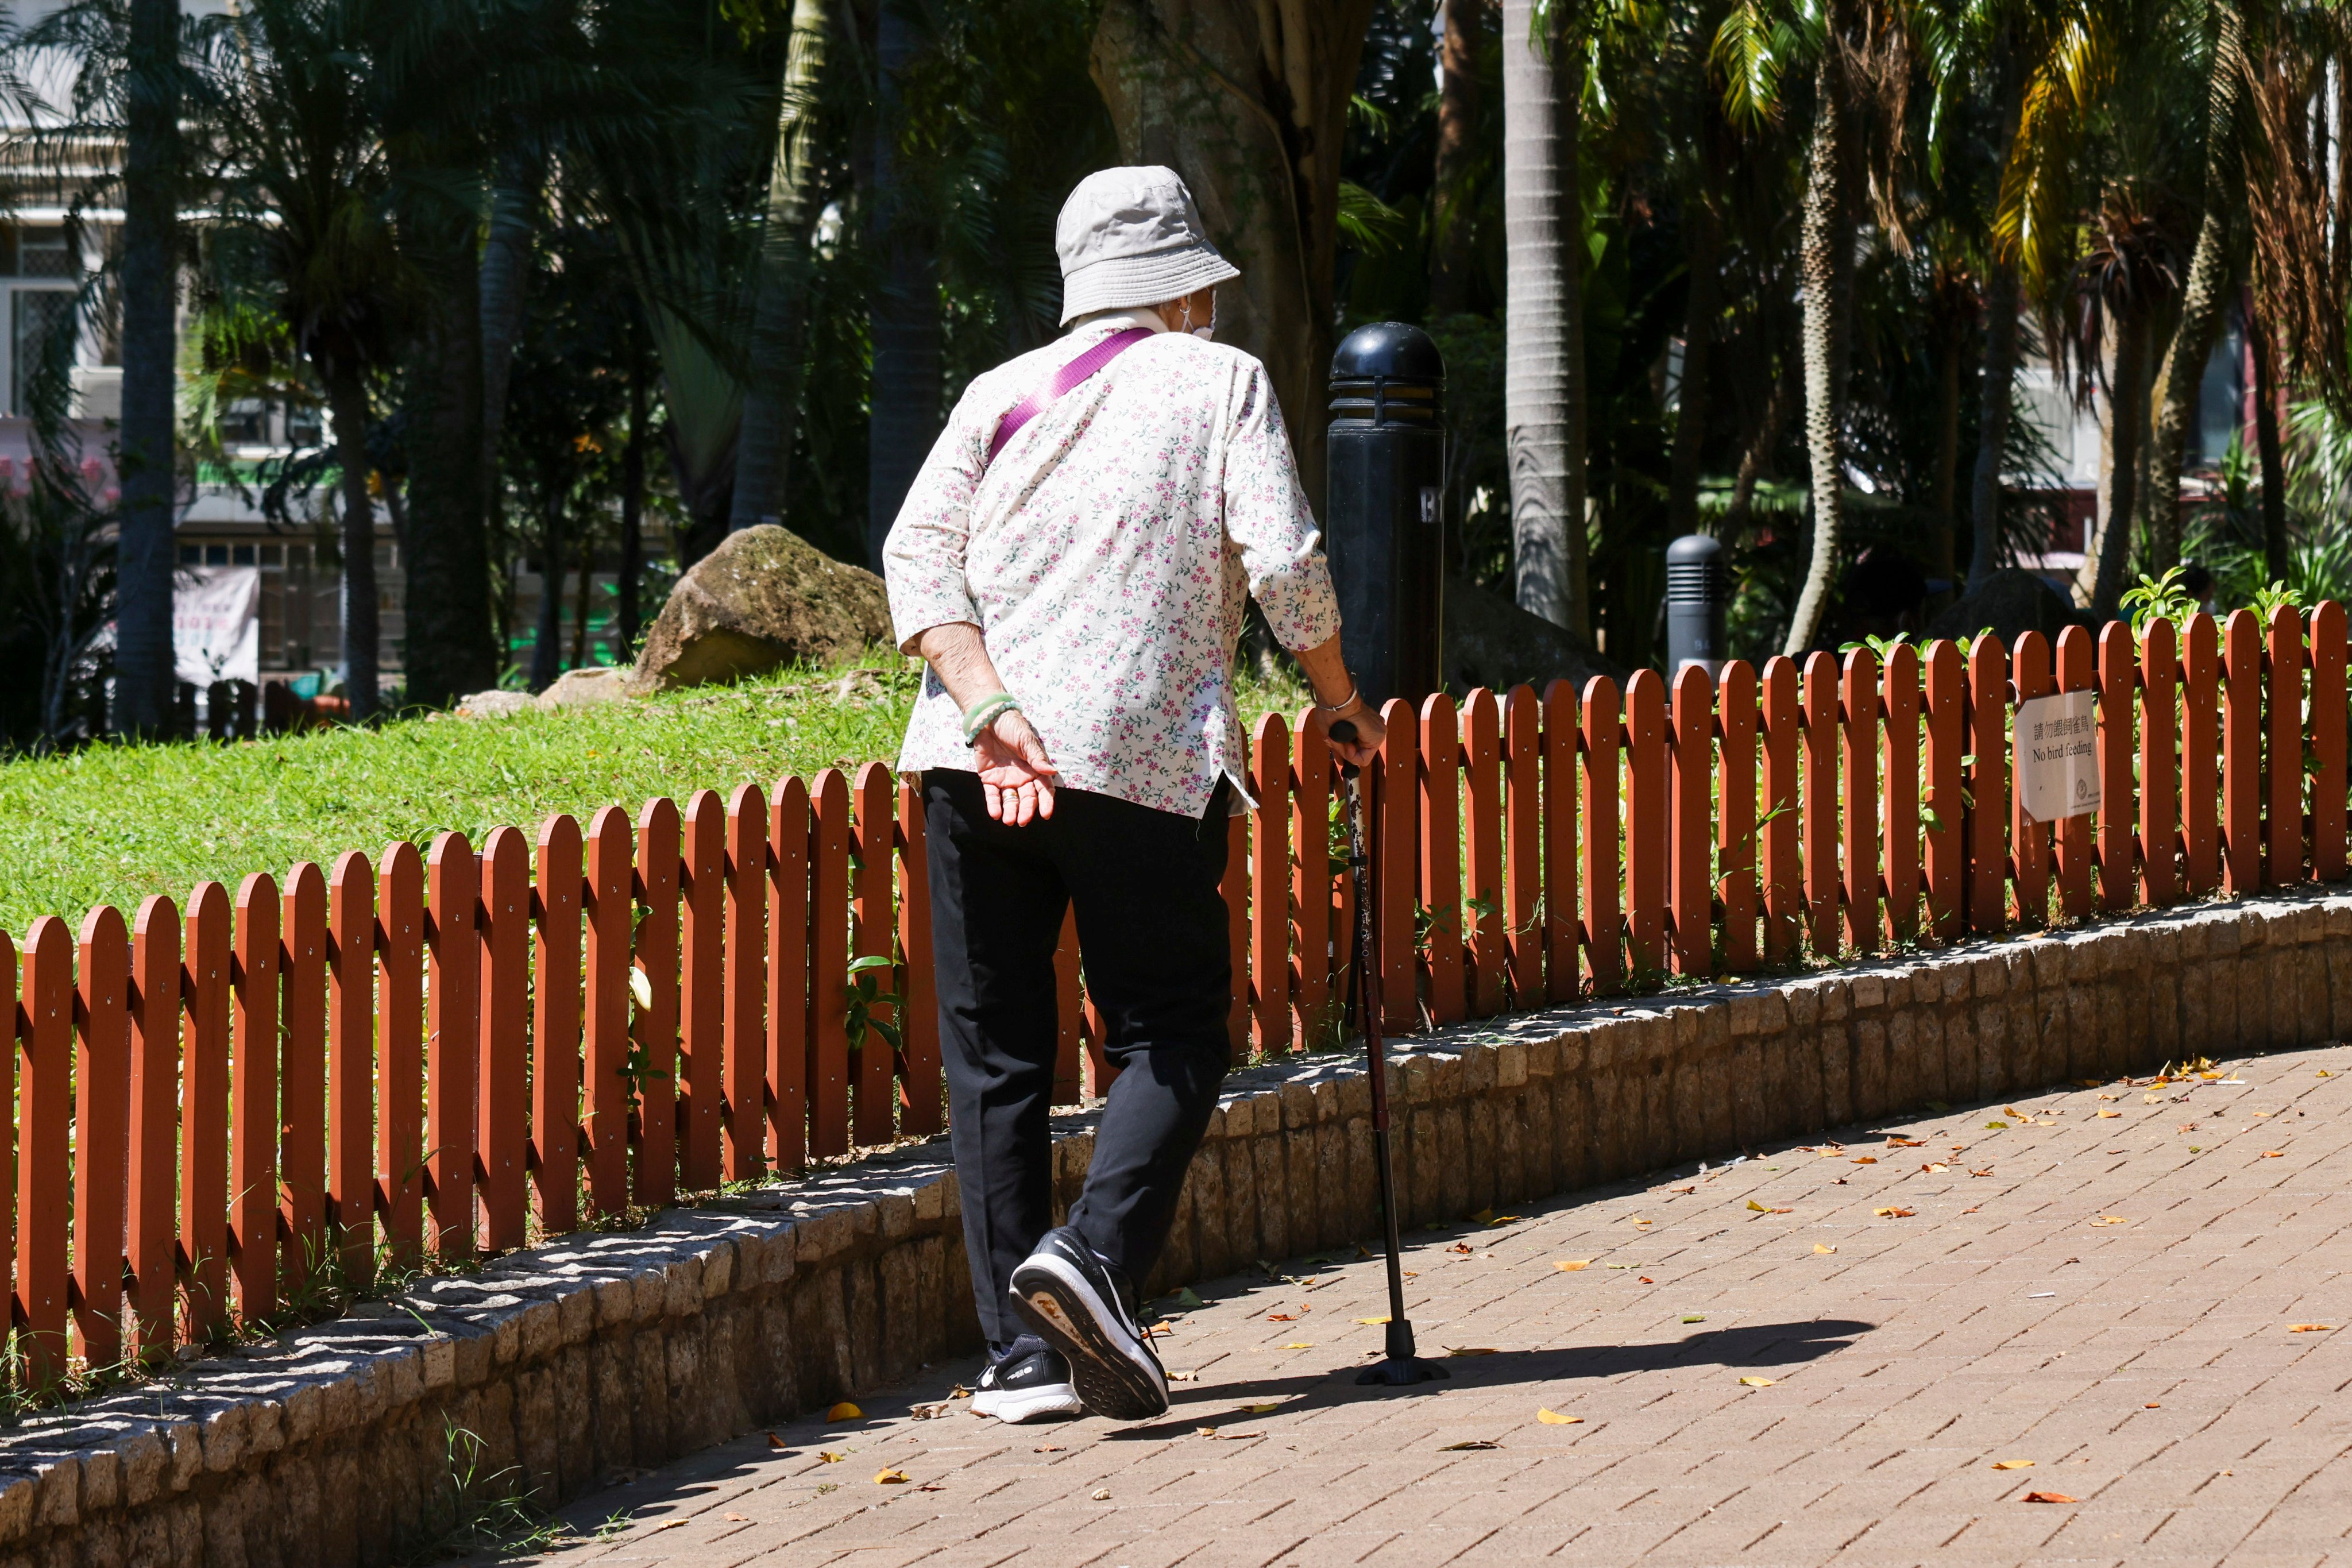 An elderly person taking a walk in Sai Kung on September 4. Photo: Dickson Lee